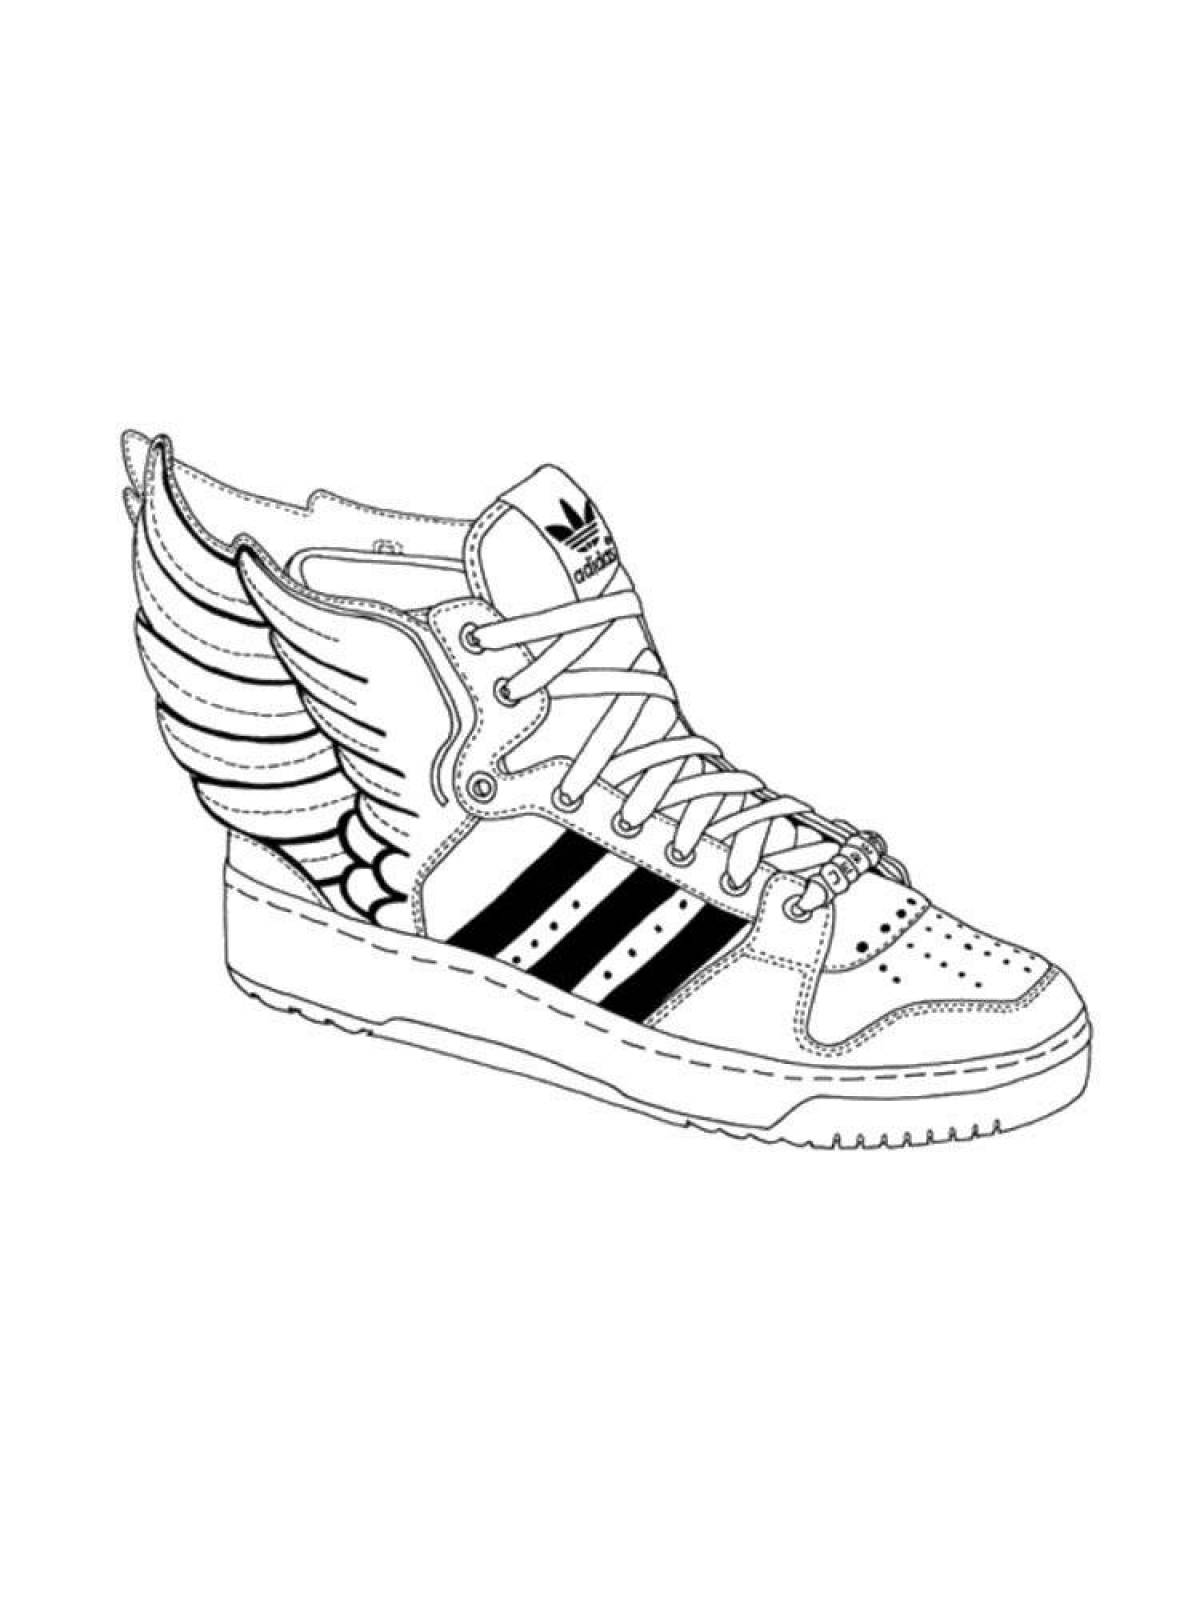 Coloring page humorous sneakers